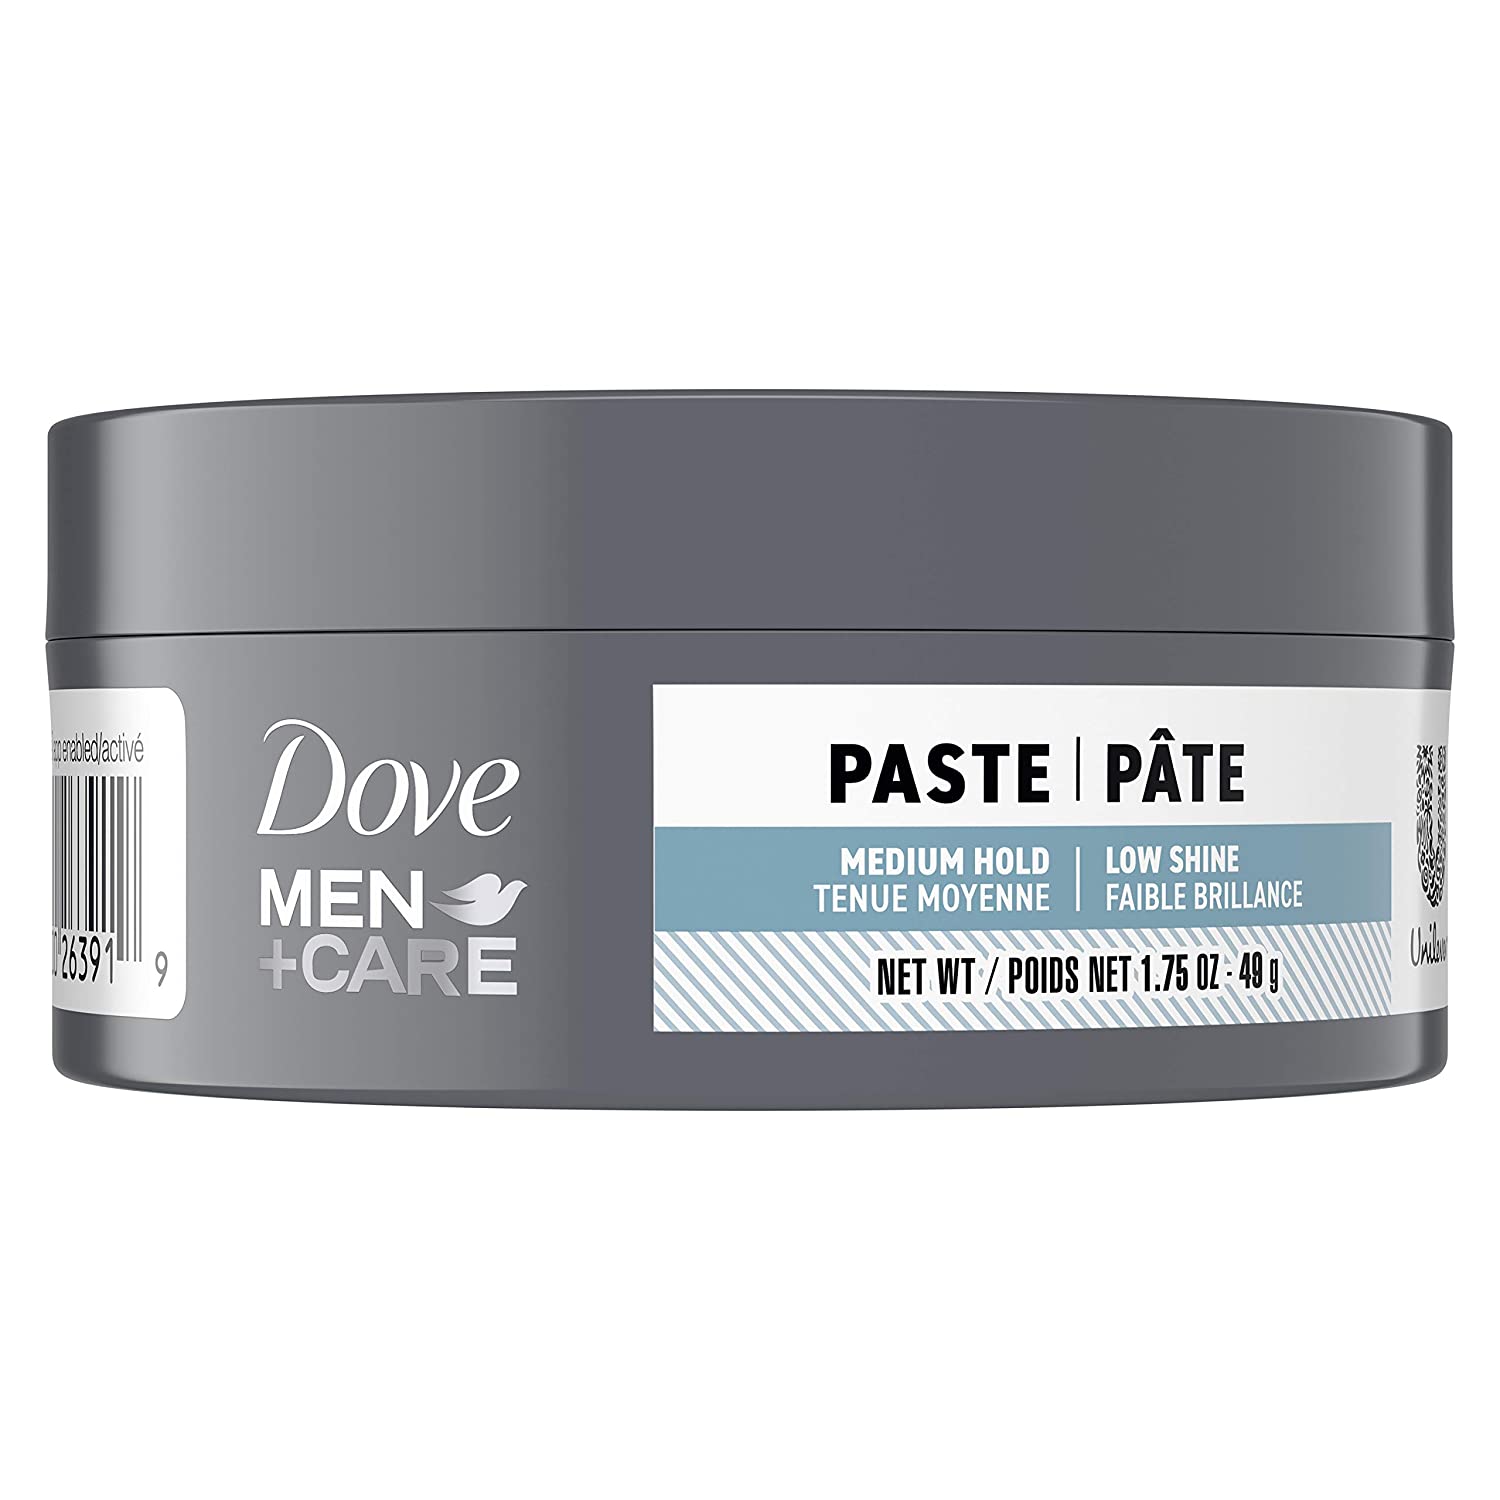 Dove Men+Care Styling Aid Hair Product Medium Hold Hair Styling & Sculpting  Paste,  Oz (49g) - Price in Pakistan